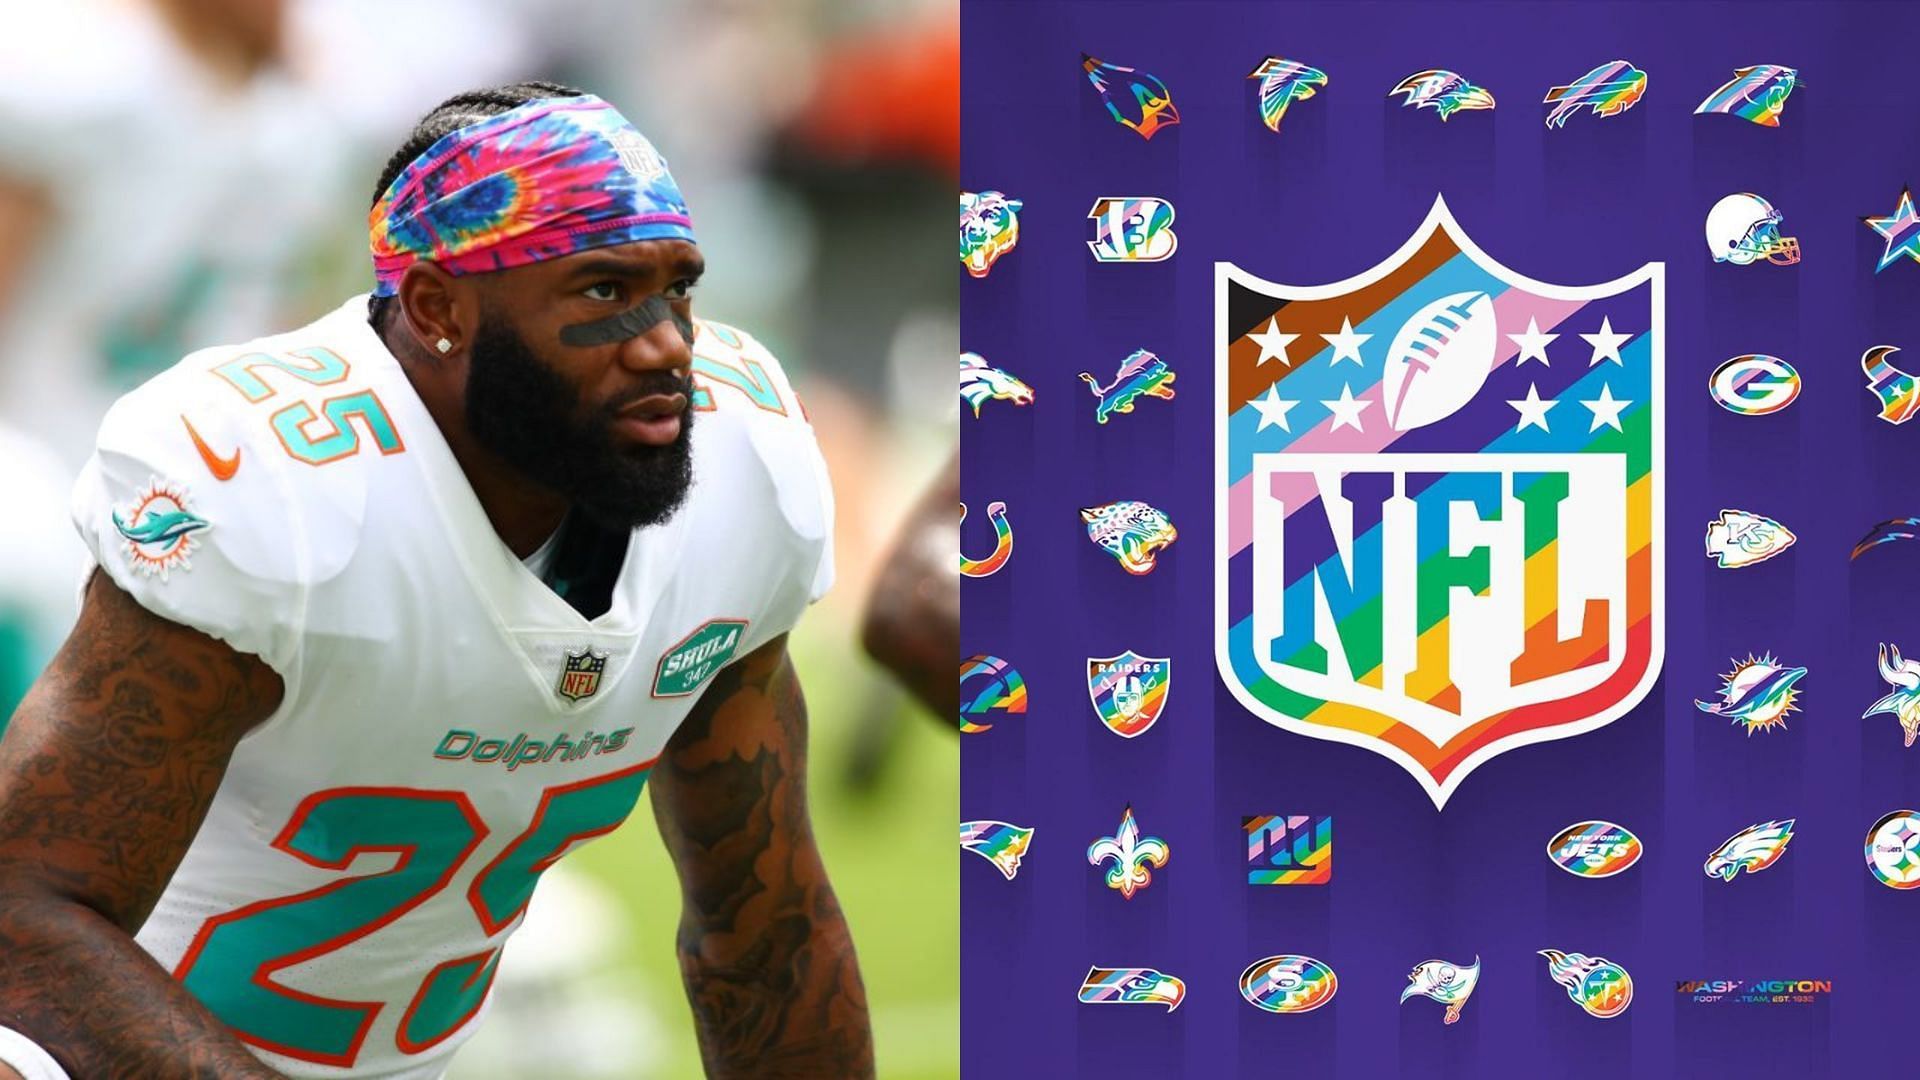 Why is the NFL wearing tie-dye and rainbow colors?